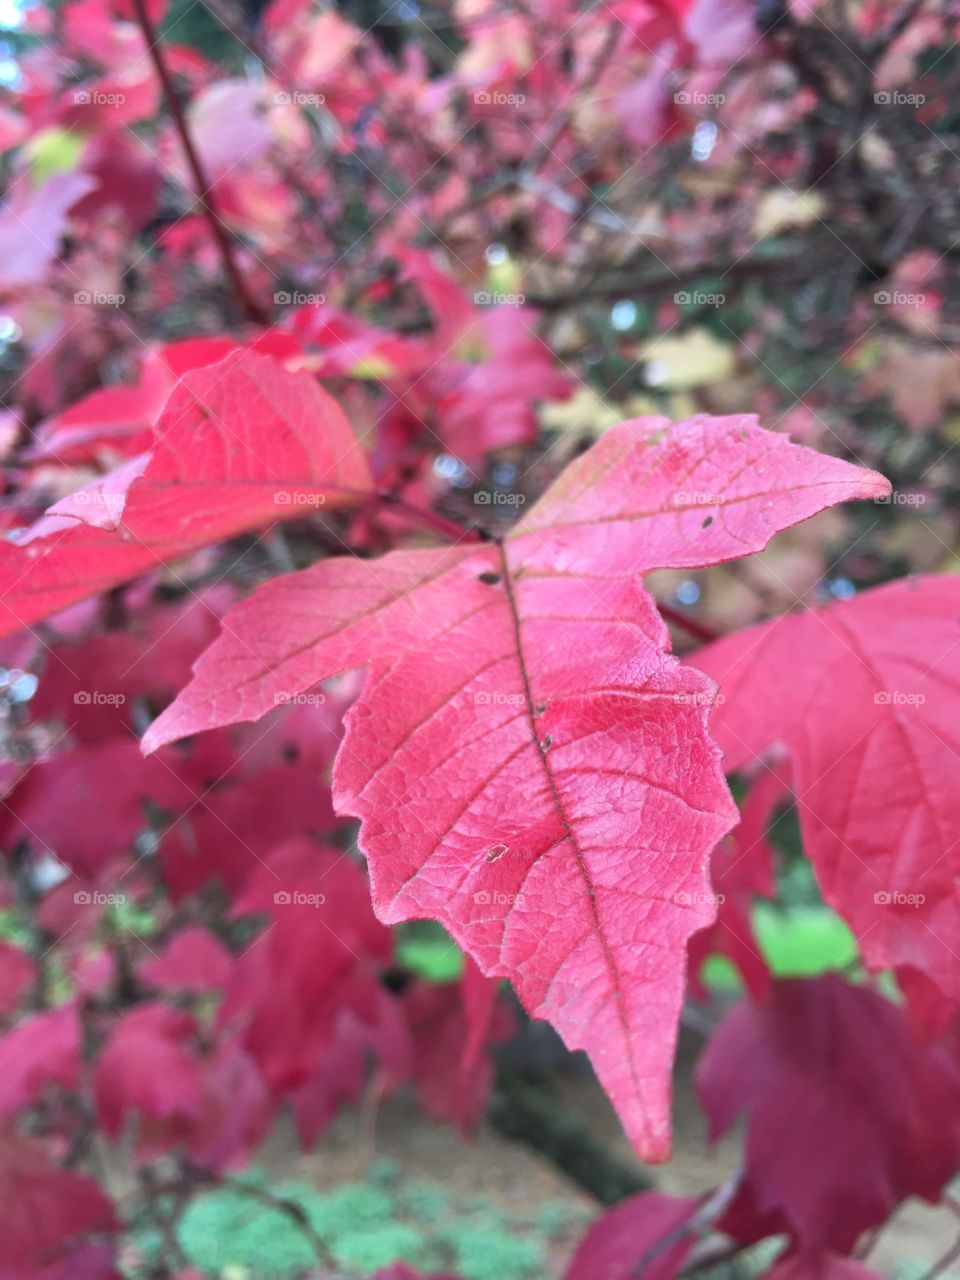 Red leaves on a tree during fall